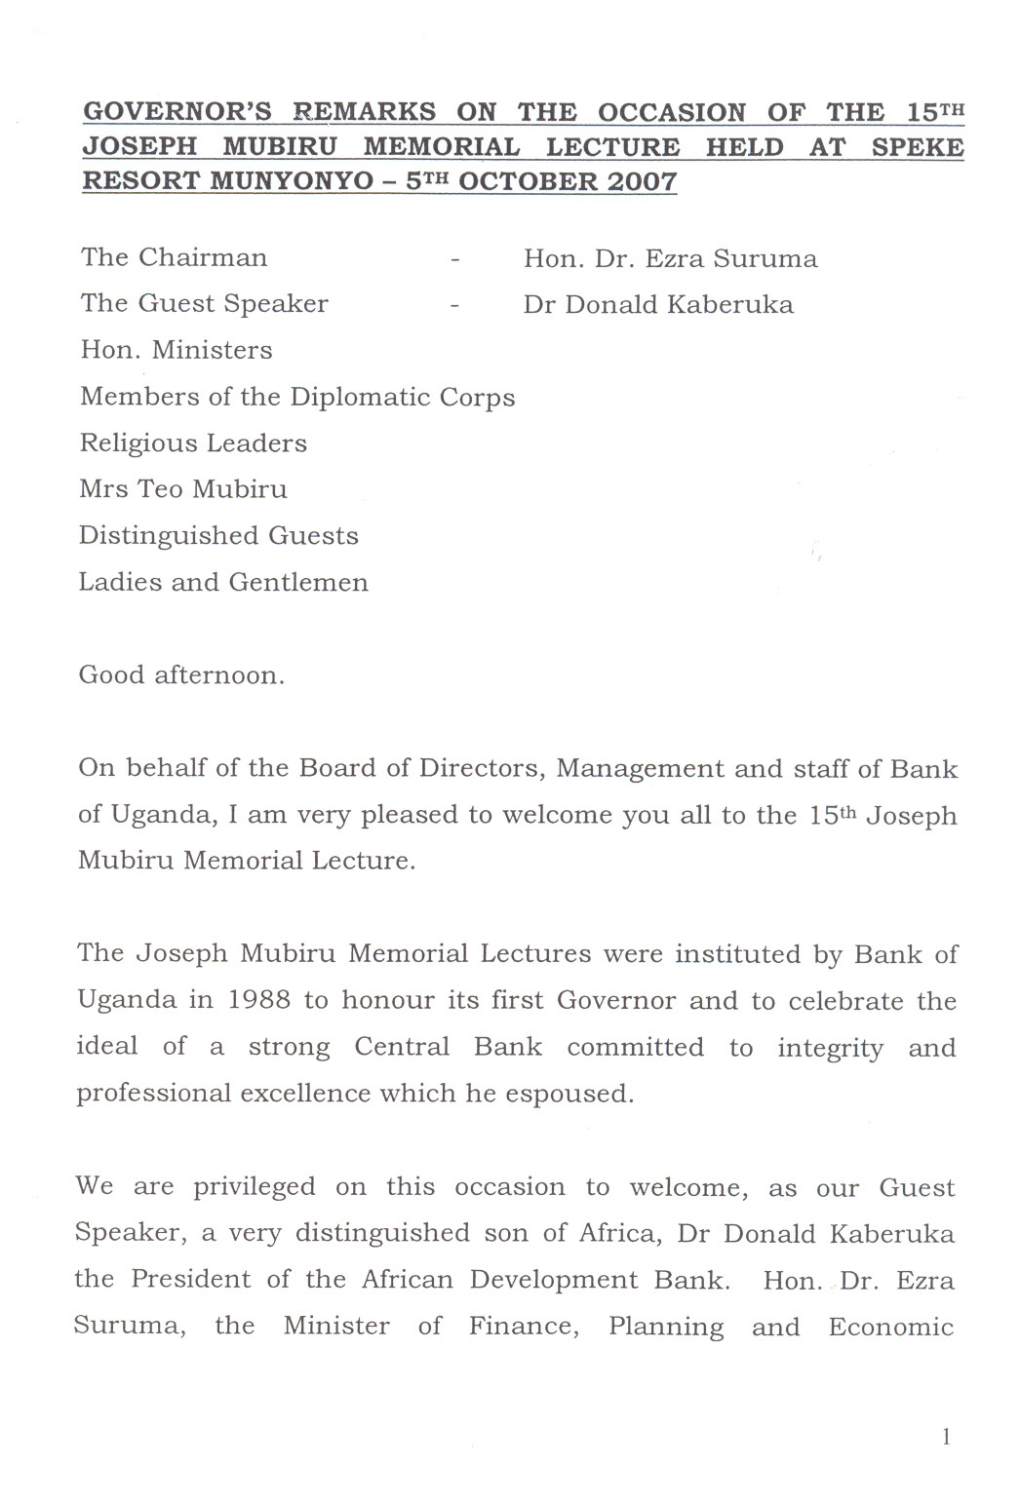 Governor's Remarks on the Occasion of the 15Th Joseph Mubiru Memorial Lecture Held at Speke Resort Munyonyo- 5Th October 2007